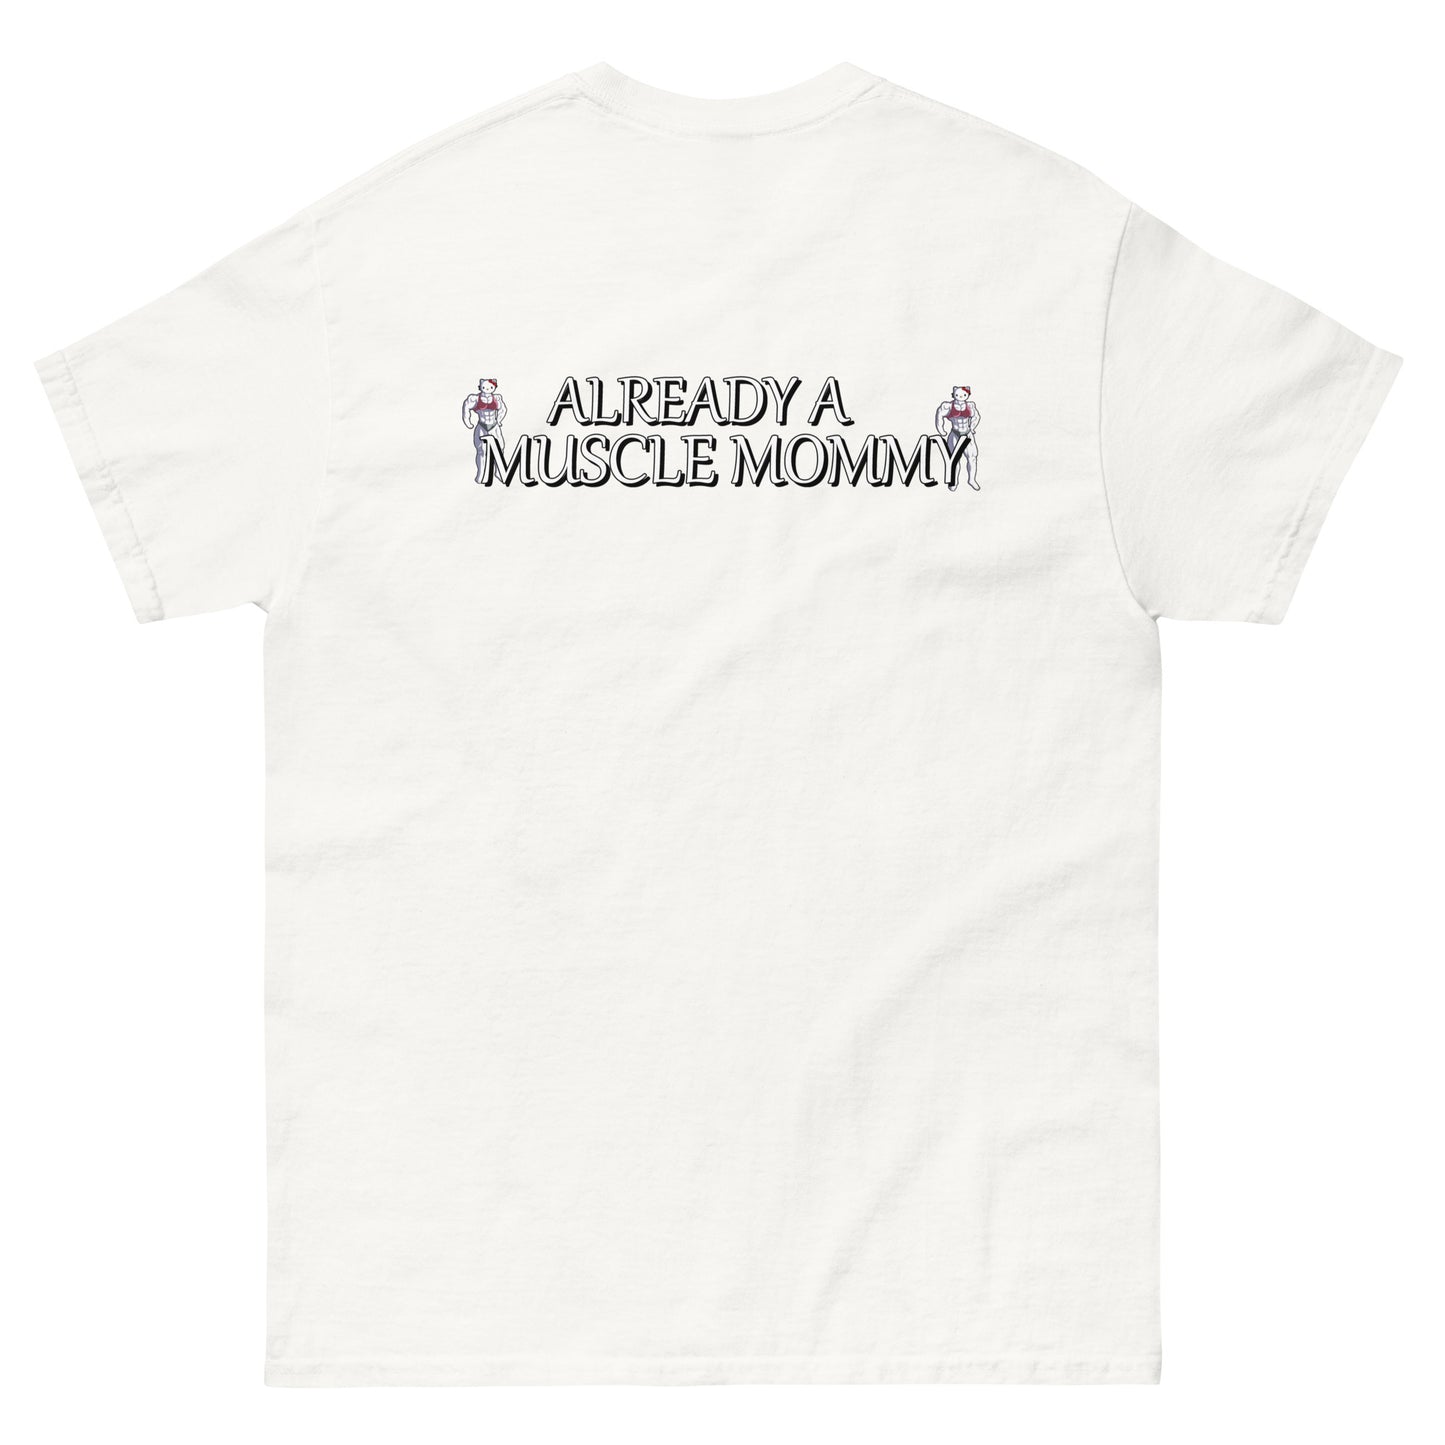 "Already a muscle mommy" - Classic T-Shirt